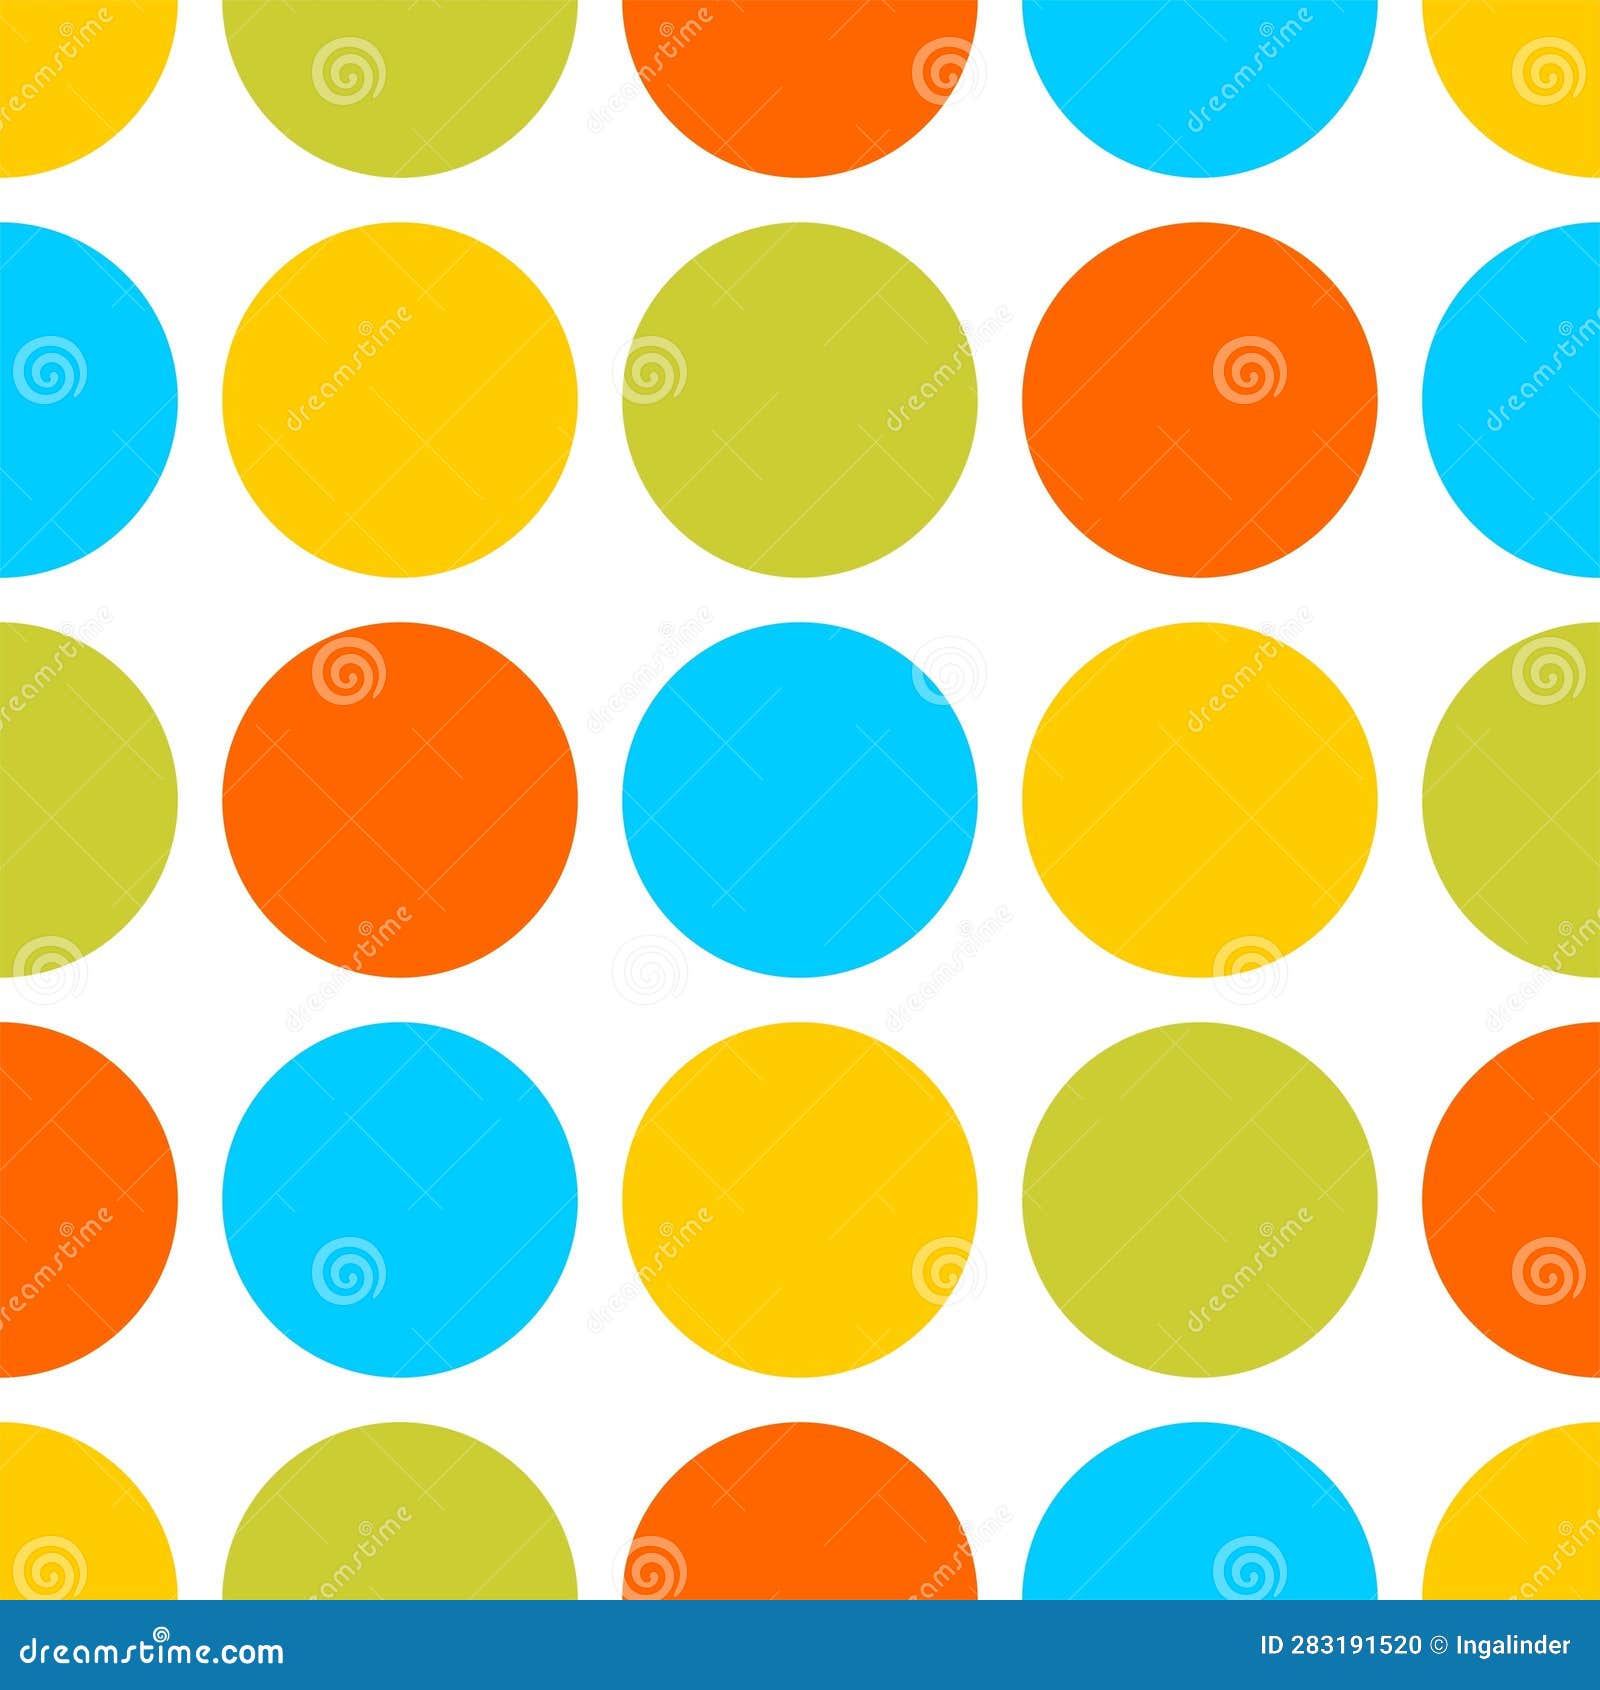 seamless  pattern or texture with spring, colorful polka dots on white background